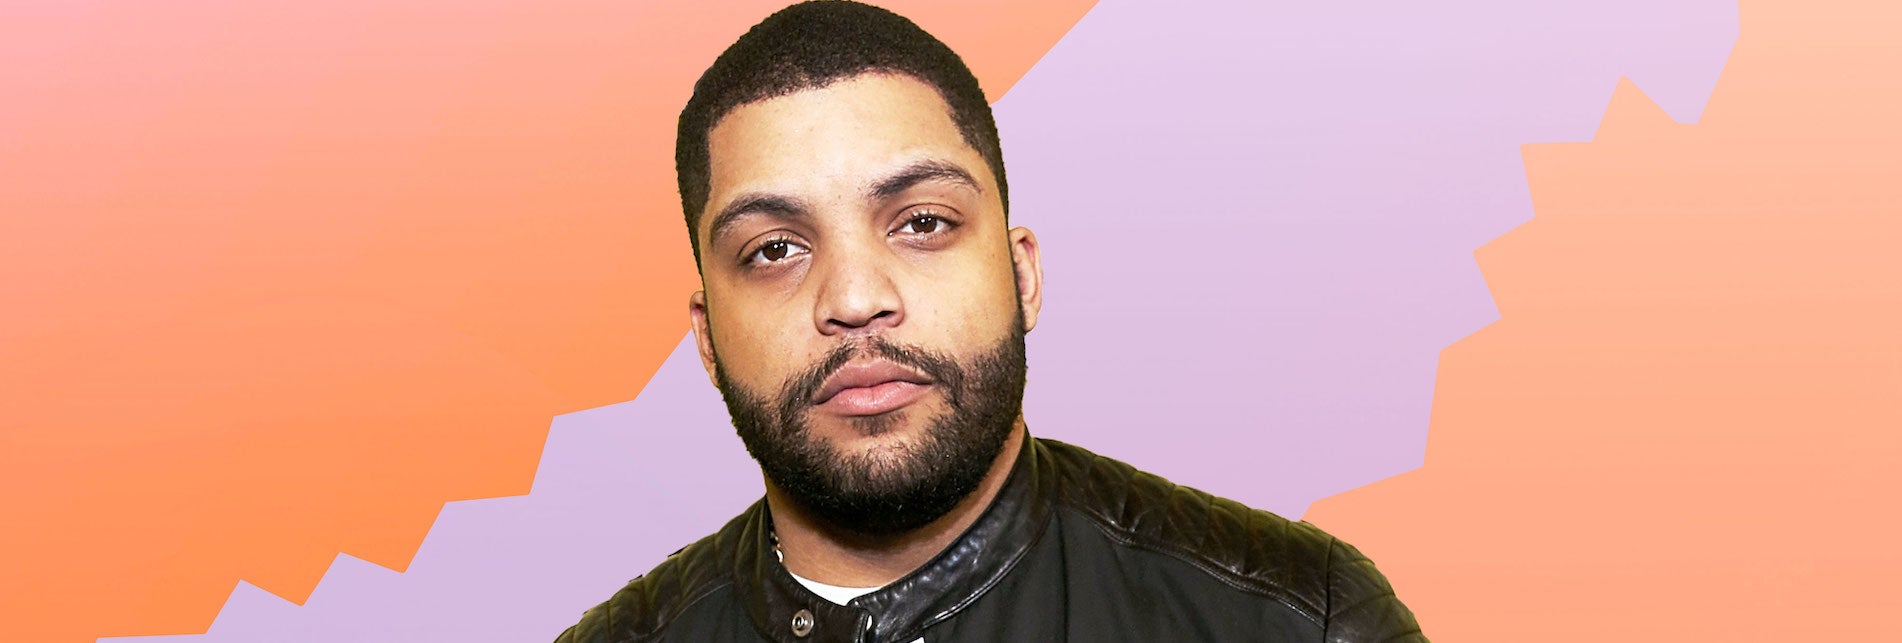 'Godzilla' Star O'Shea Jackson Jr. Says Being Ice Cube's Son 'Is A Gift And A Curse'